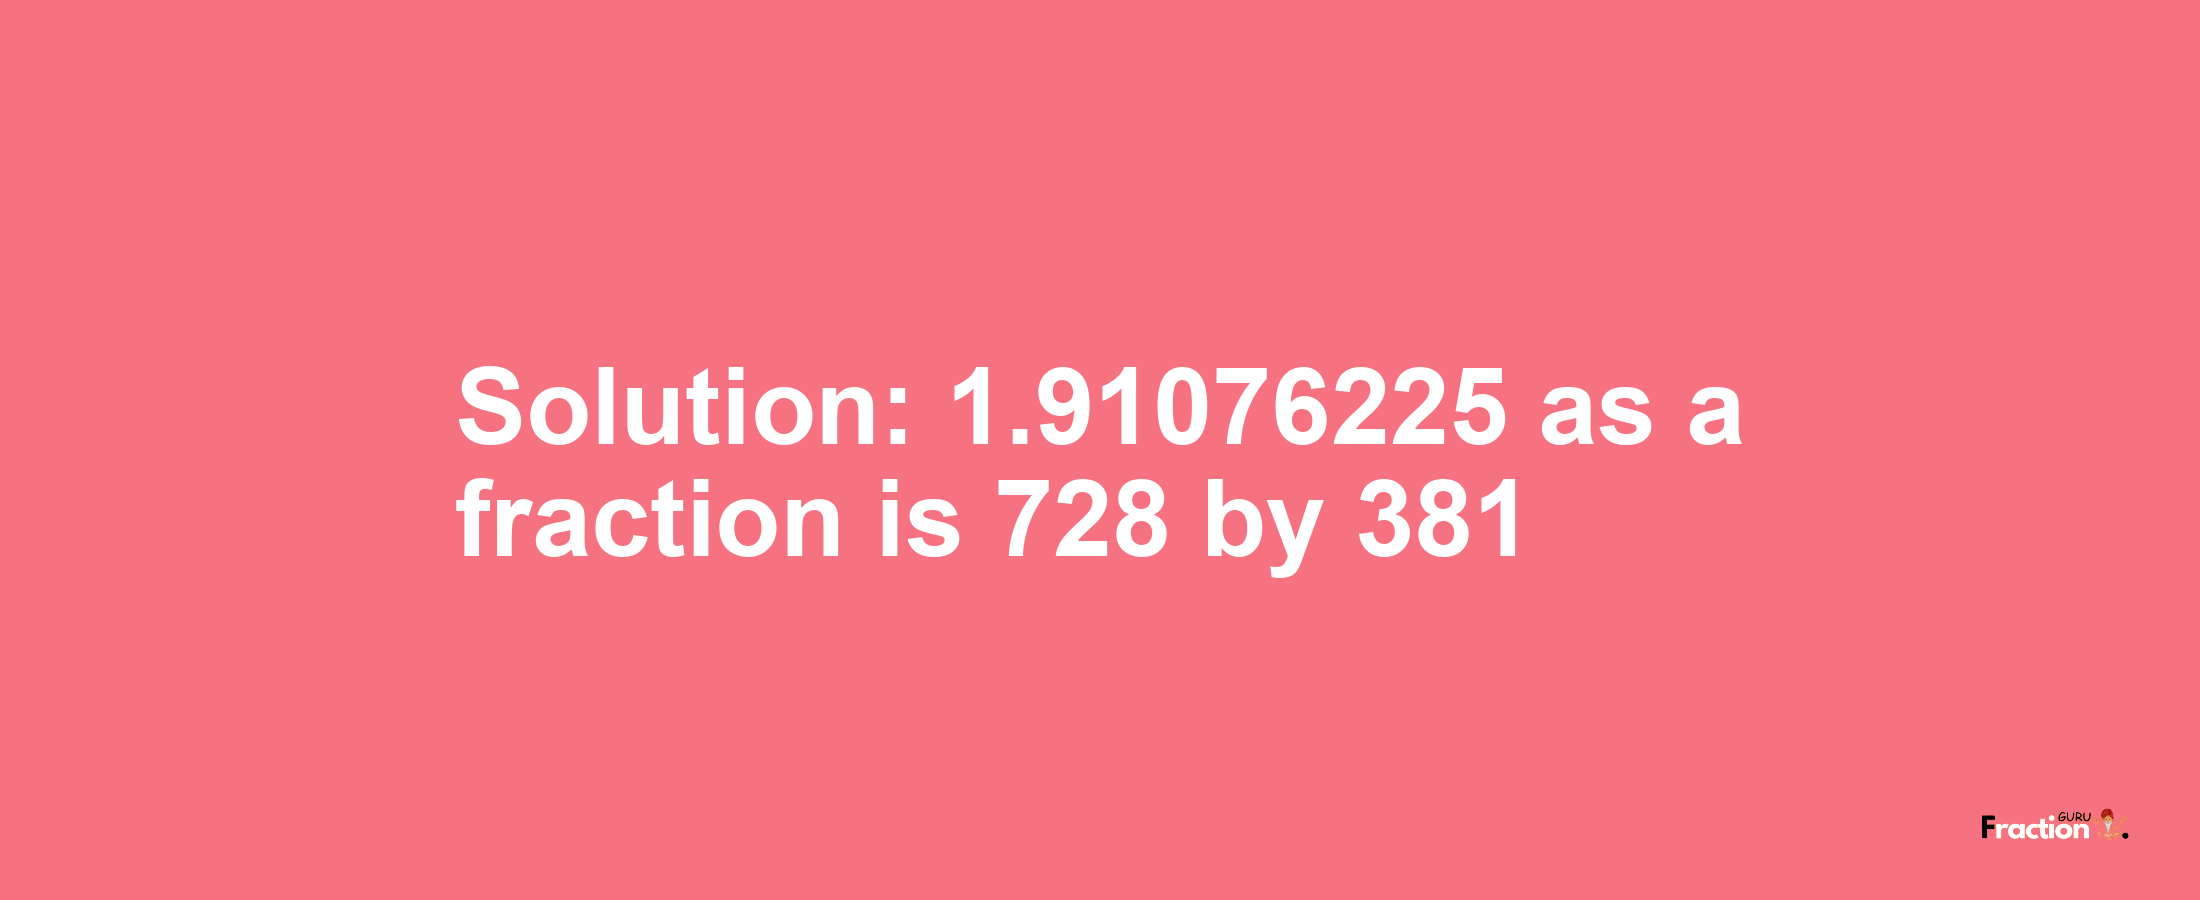 Solution:1.91076225 as a fraction is 728/381